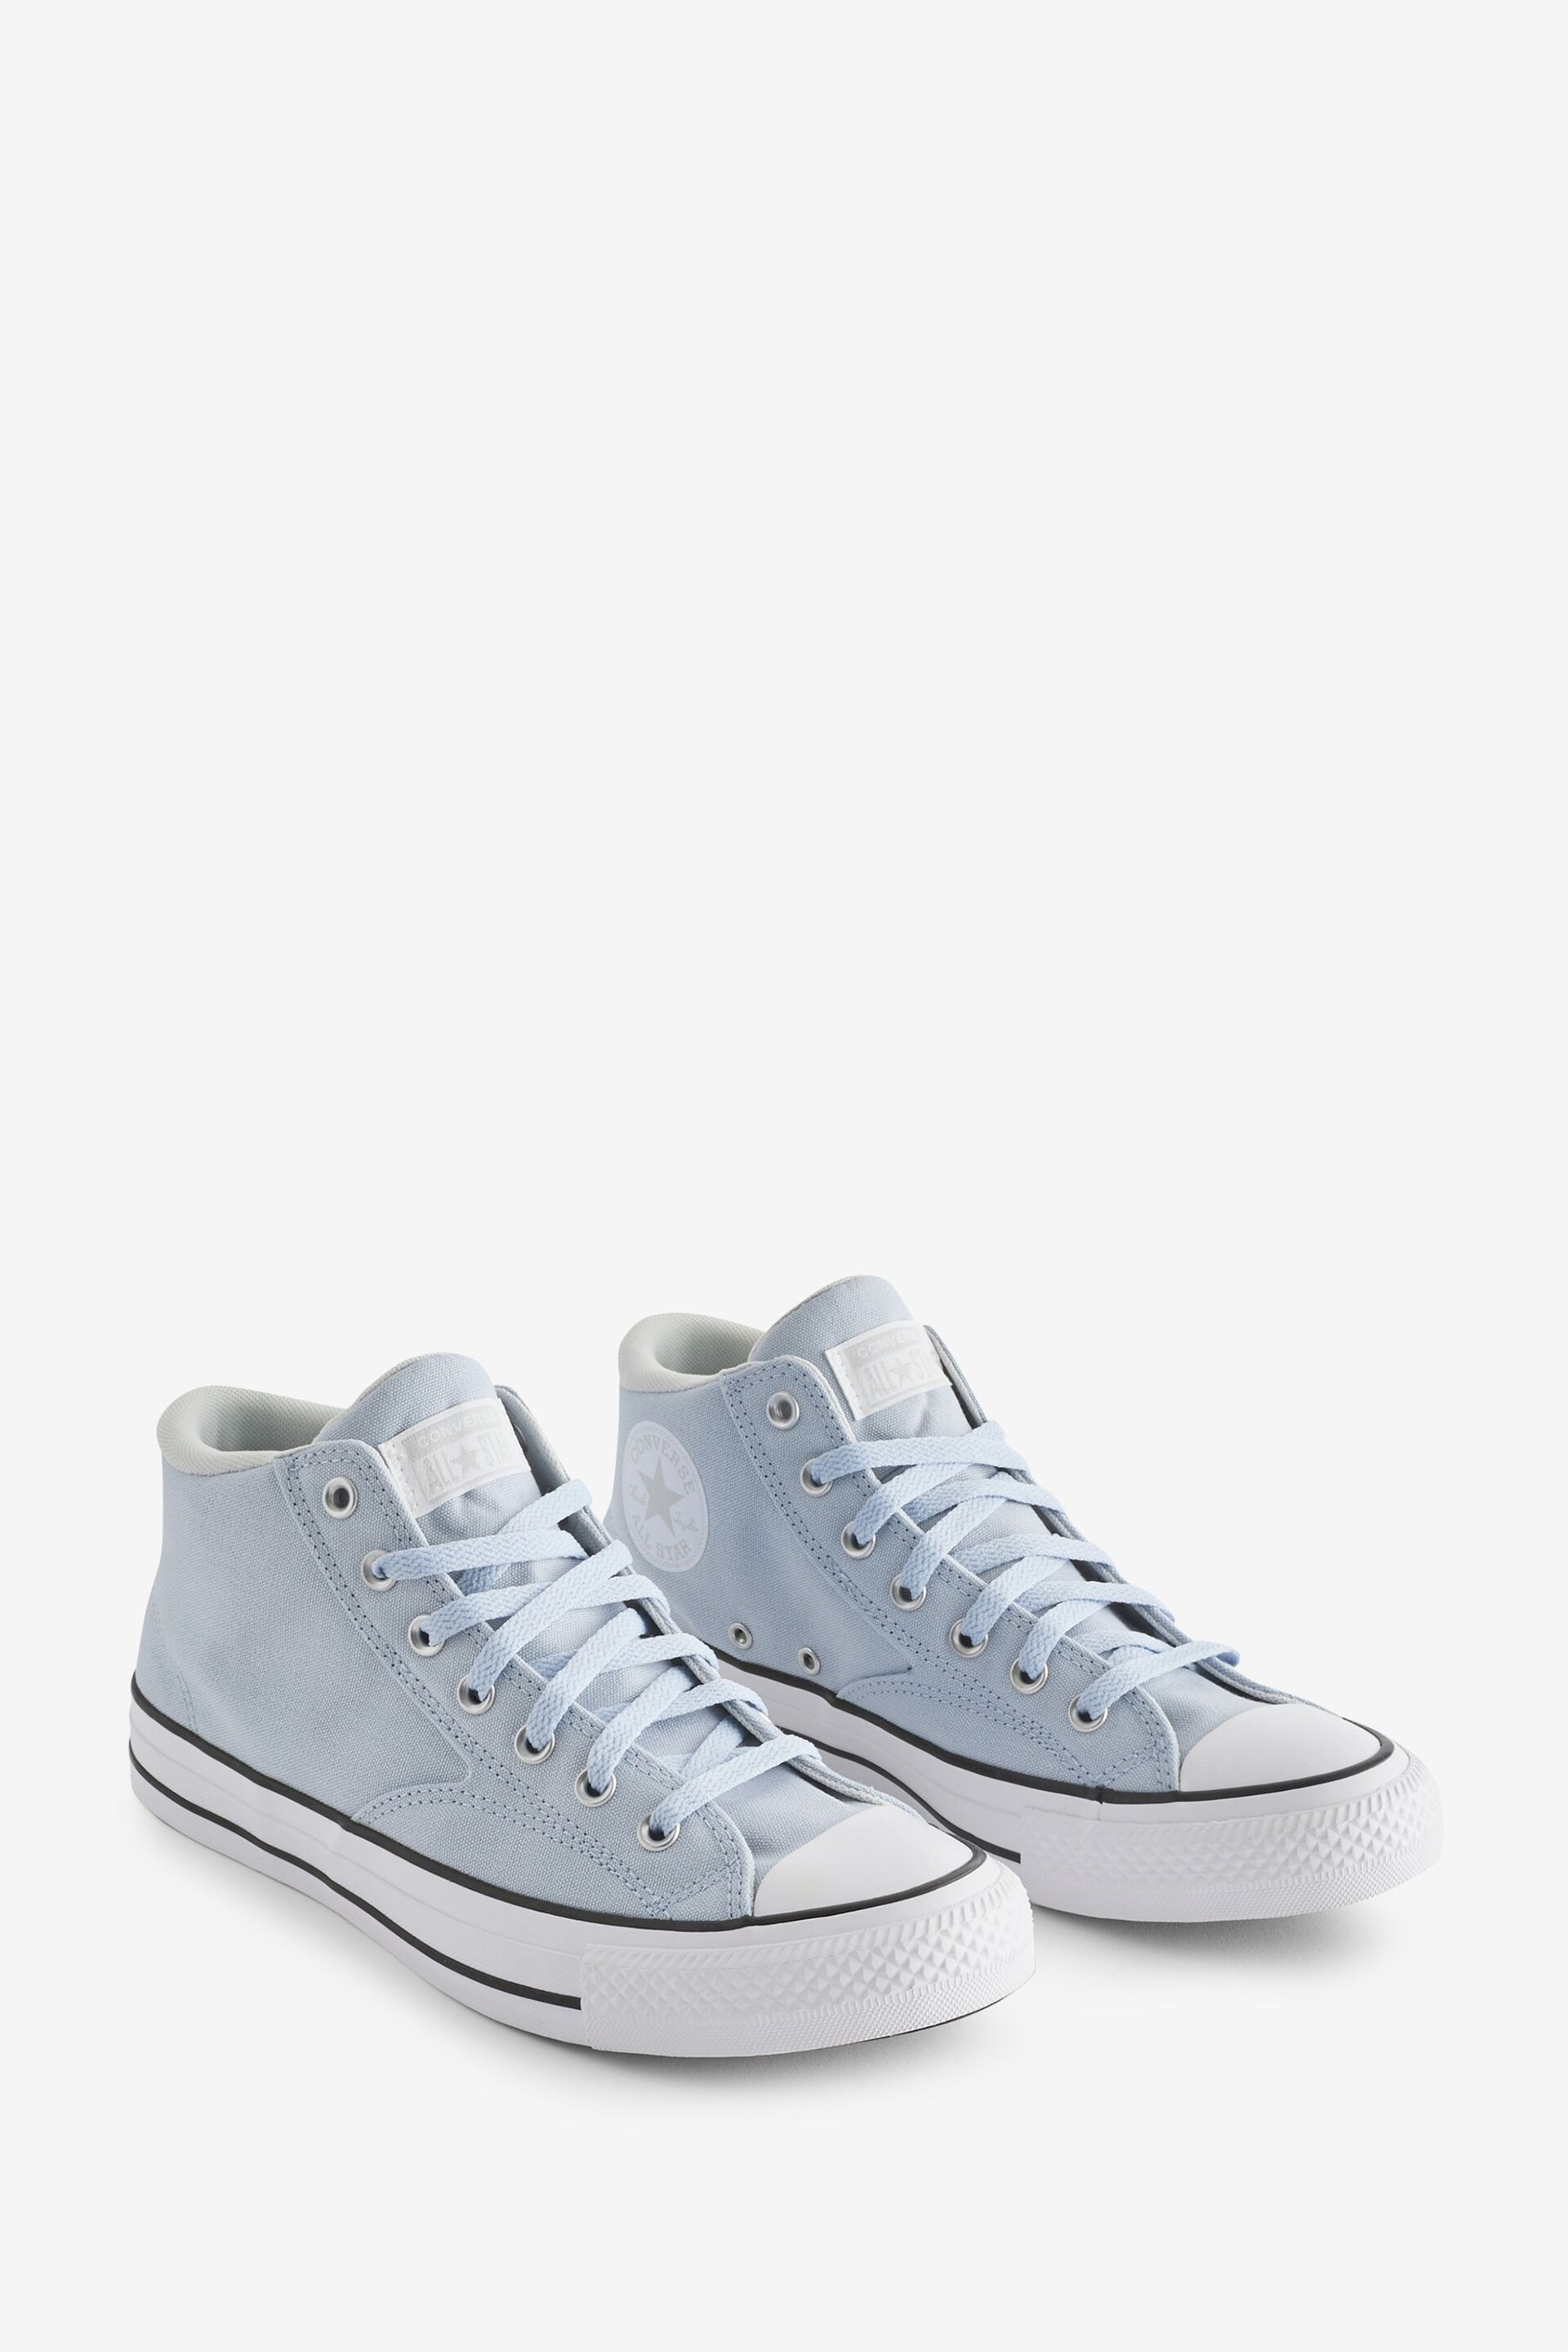 Converse Blue Chuck Taylor All Star Malden Street Trainers - Image 3 of 15